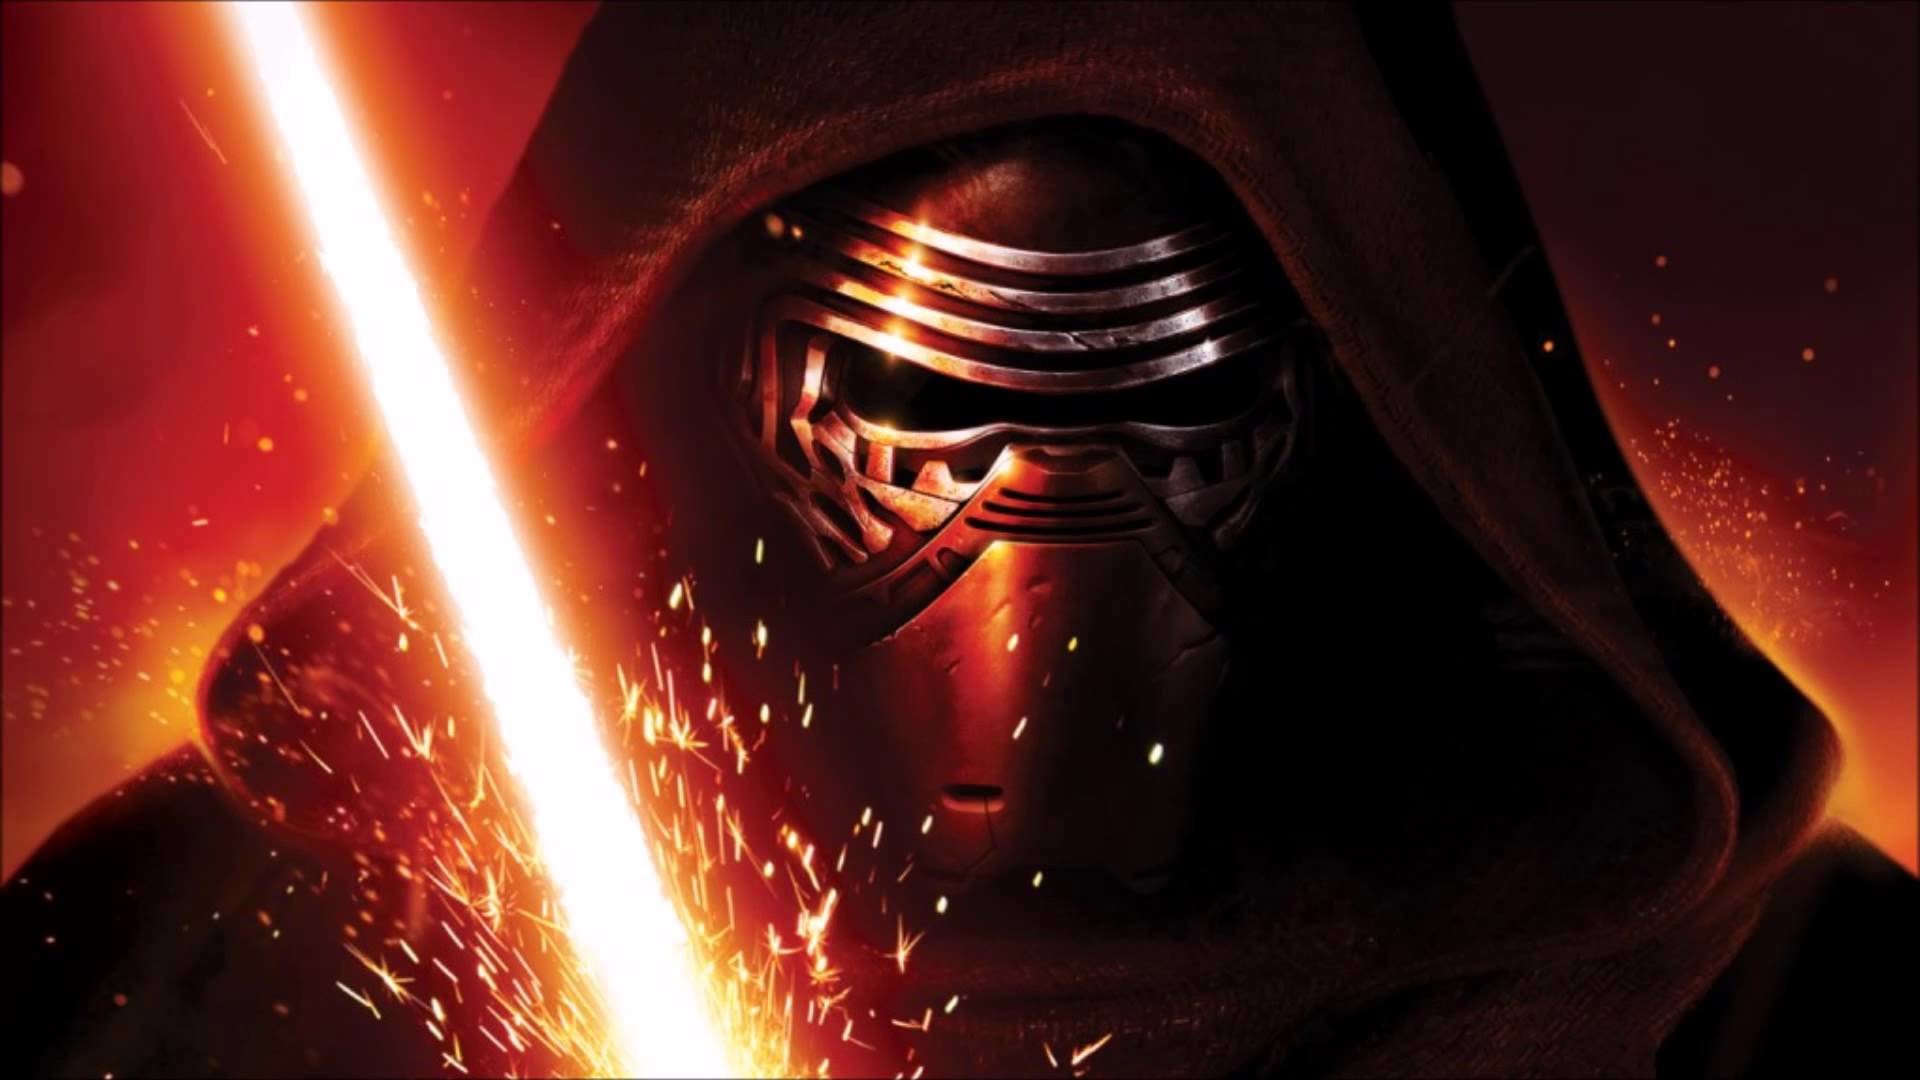 1920x1080 Star Wars: The Force Awakens - The Voice of Kylo Ren?